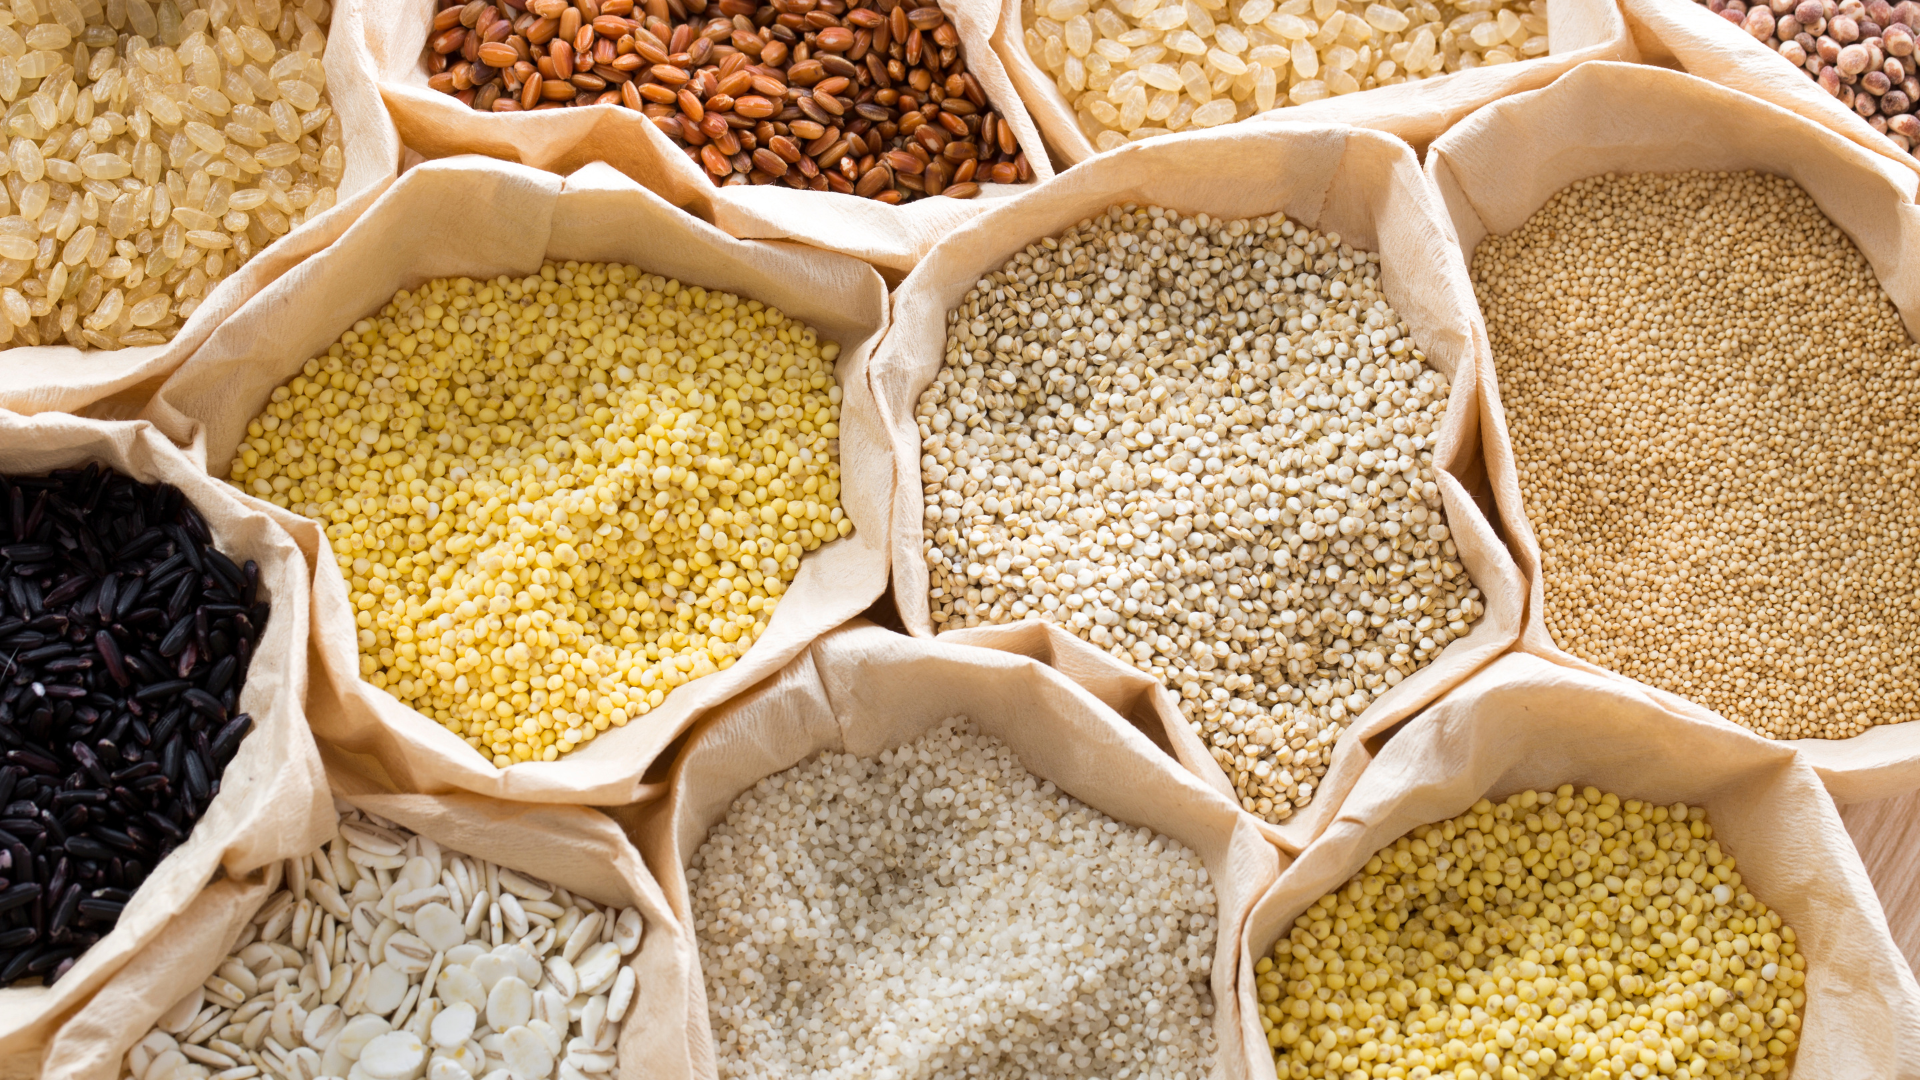 2023 - The International Year of Millets: A Gateway to Nutritional and Climate Resilience